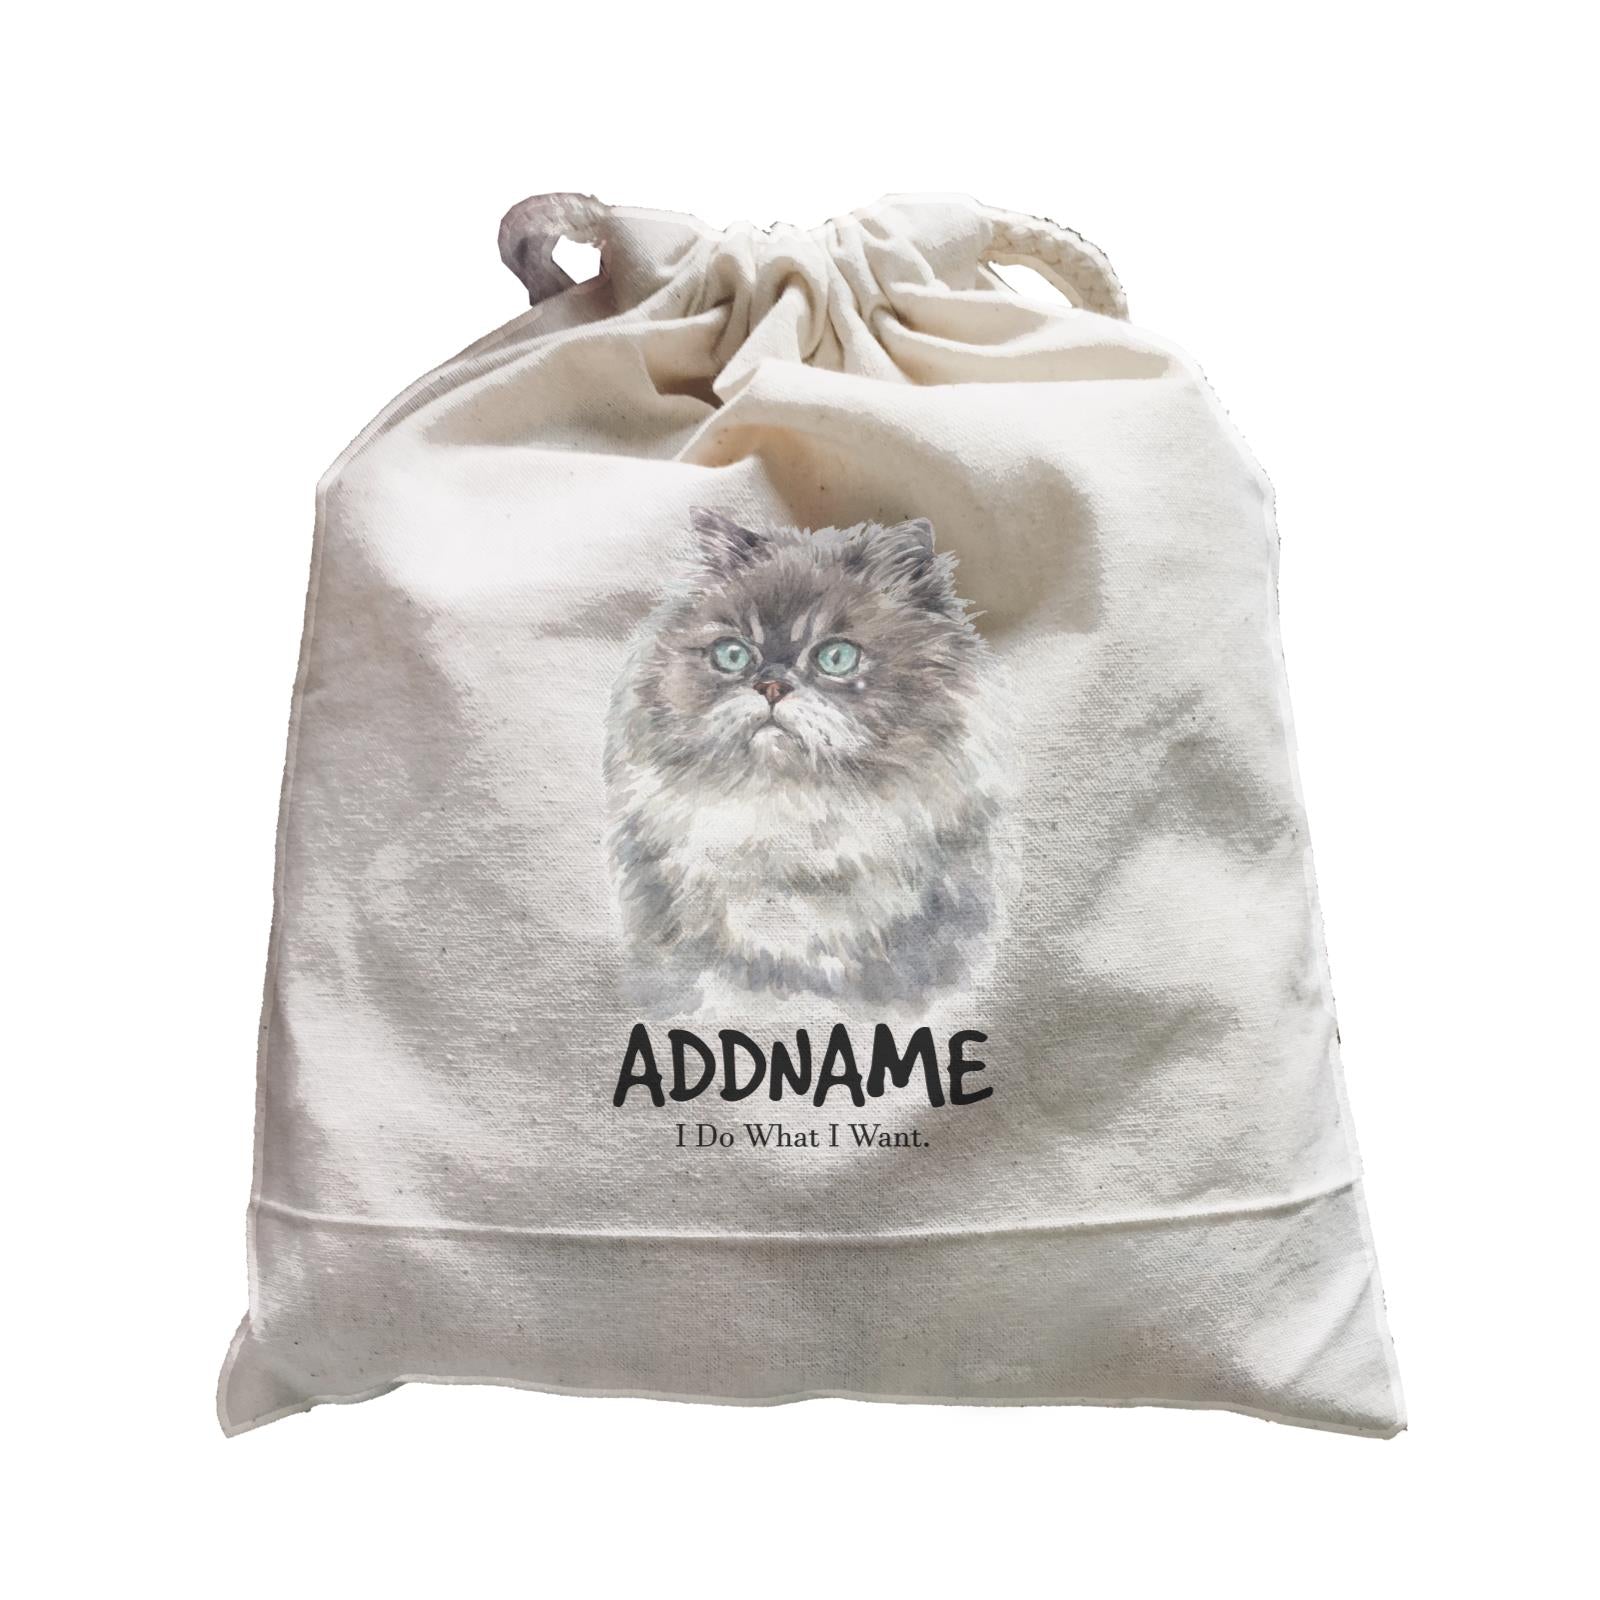 Watercolor Cat Himalayan Grey I Do What I Want Addname Satchel